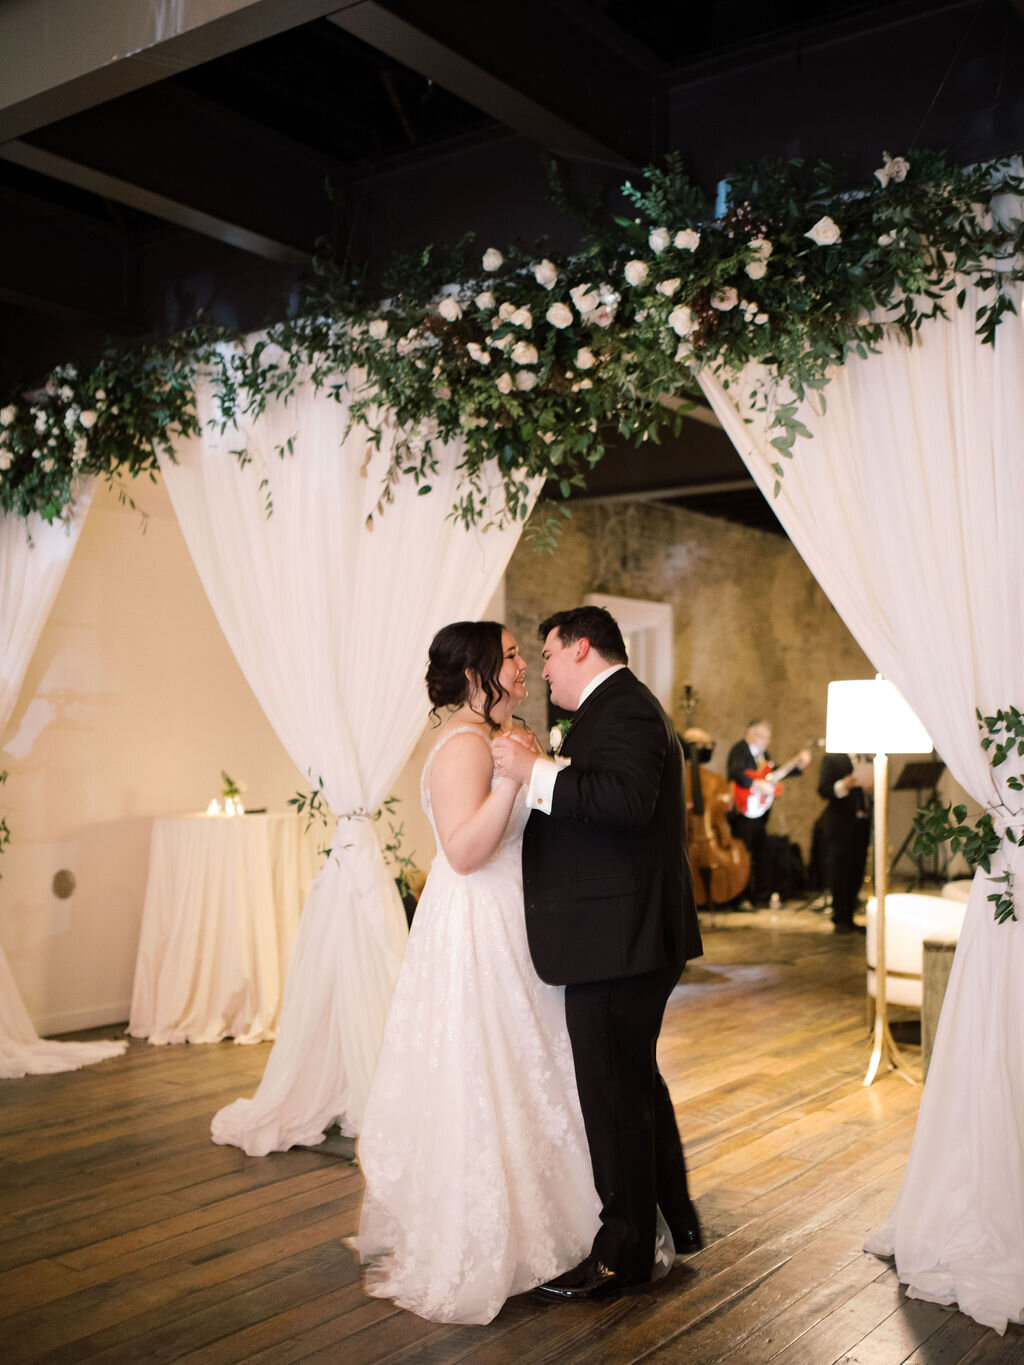 A growing installation of blush and ivory garden roses, white ranunculus, creamy spray roses, delicate eriostemon and lush greenery separated the reception area from the lounge area at the Cordelle. Designed by florist Rosemary & Finch in Nashville,…